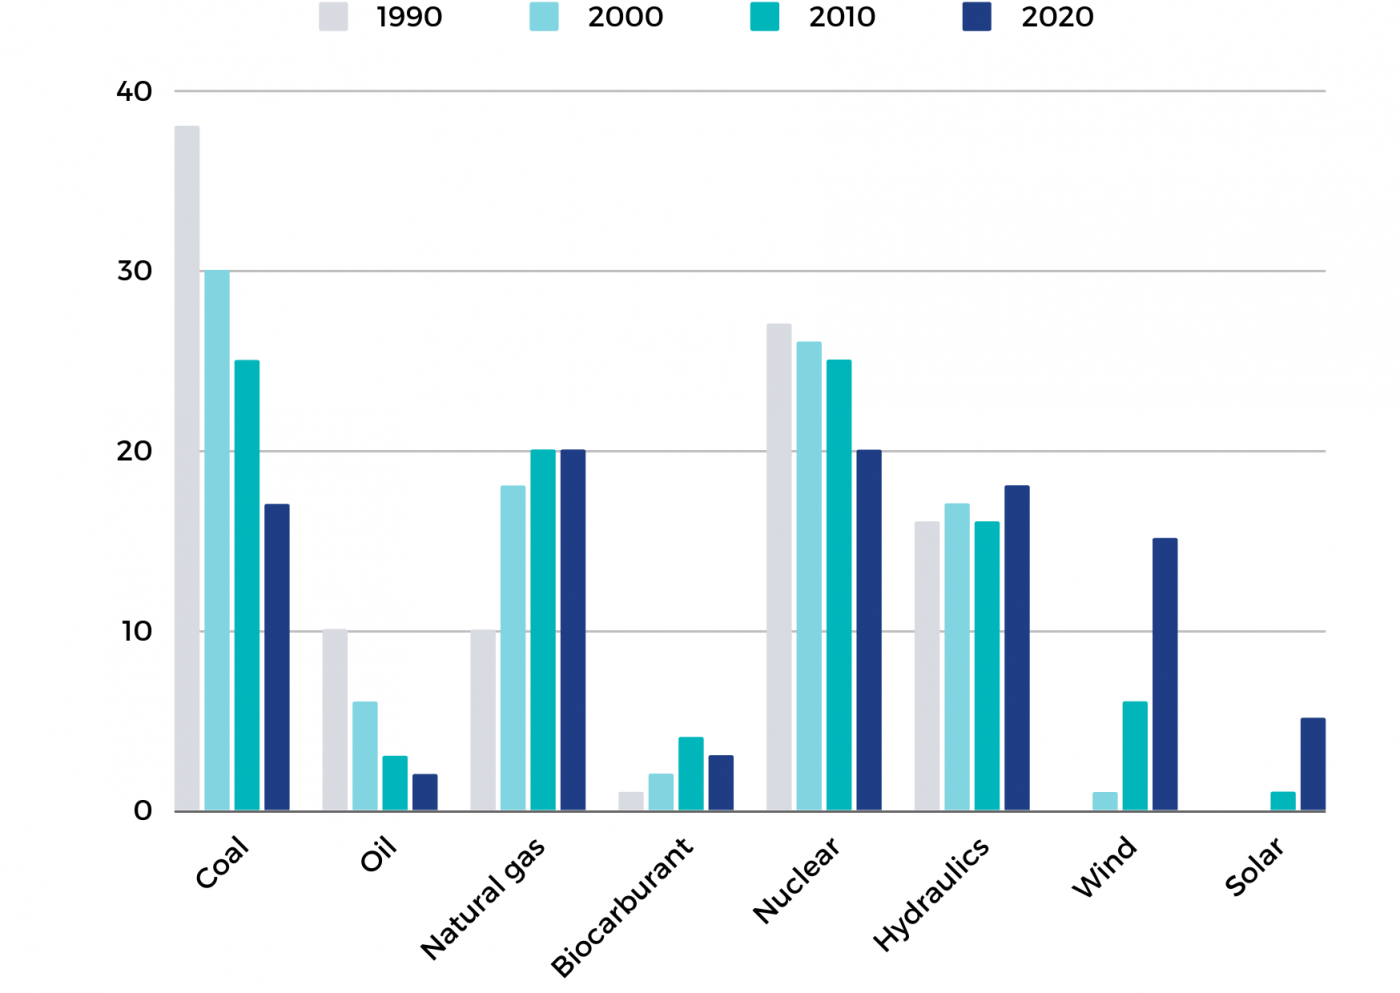 Europe: Energy Mix from 1990 to 2020